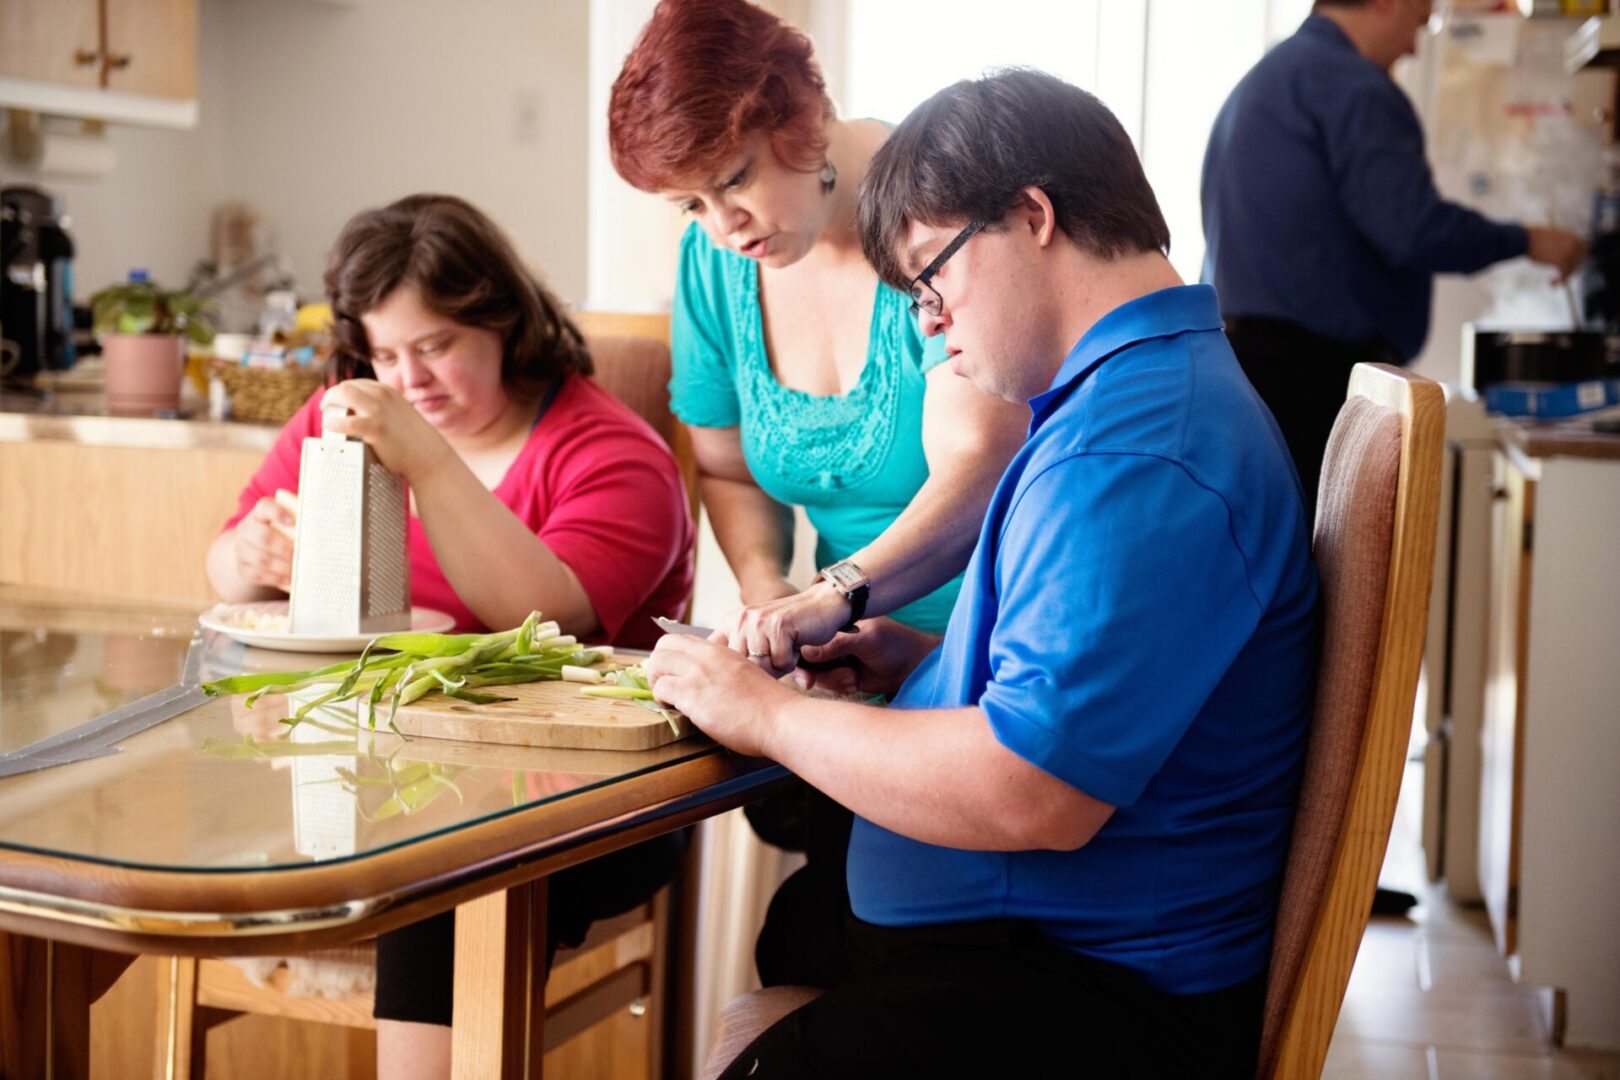 A group of people sitting at a table with food.